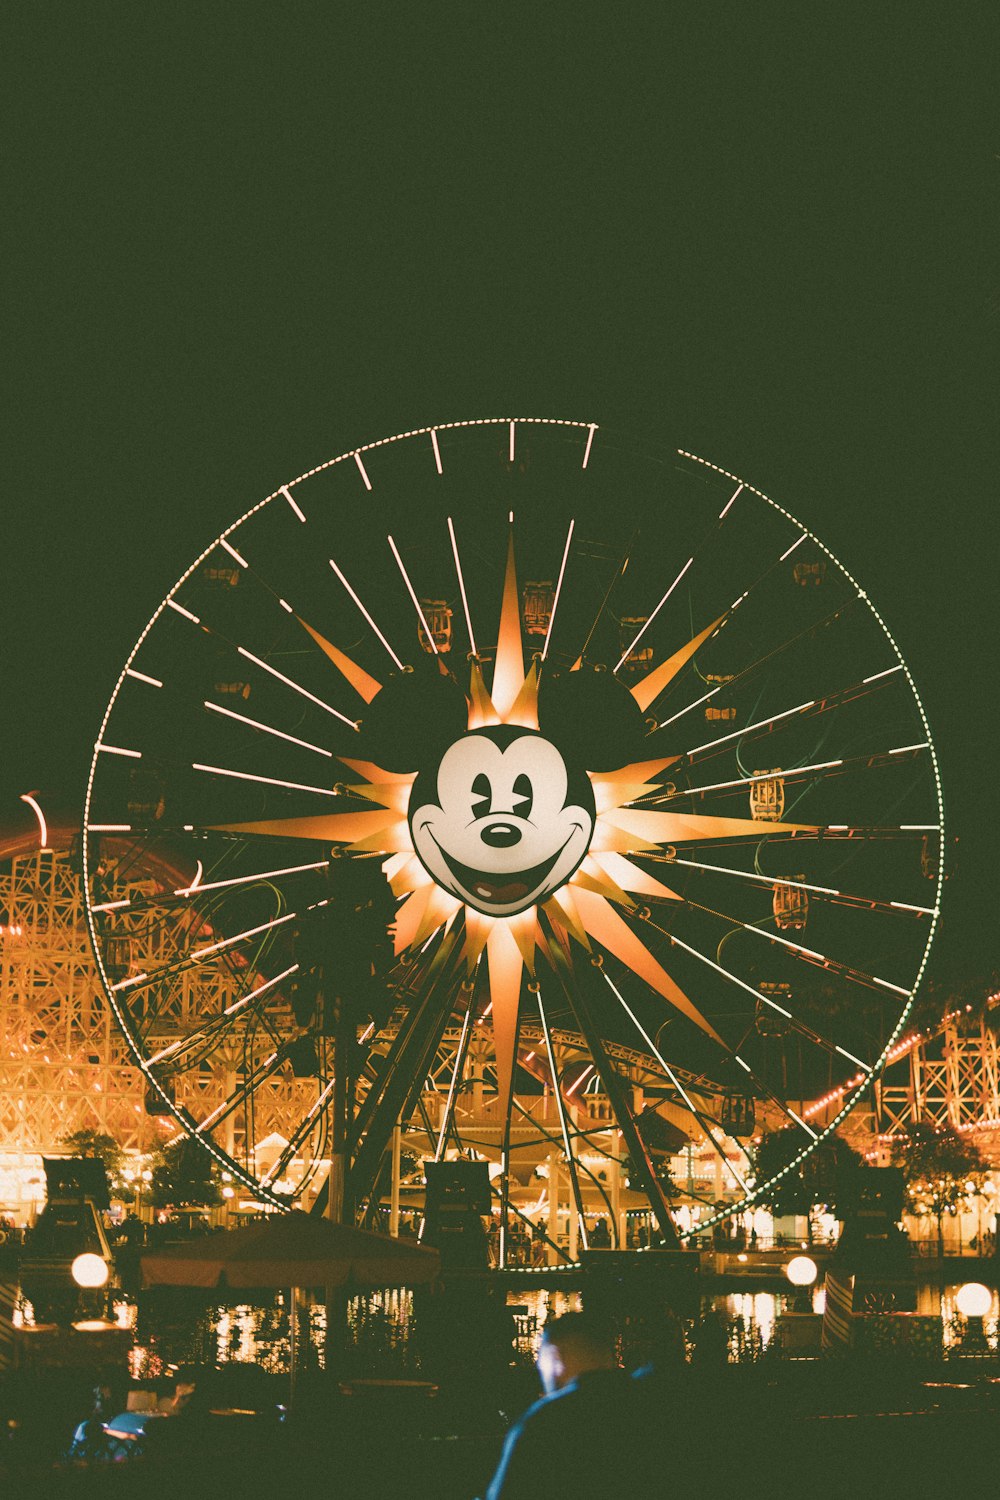 a ferris wheel with a smiley face on it